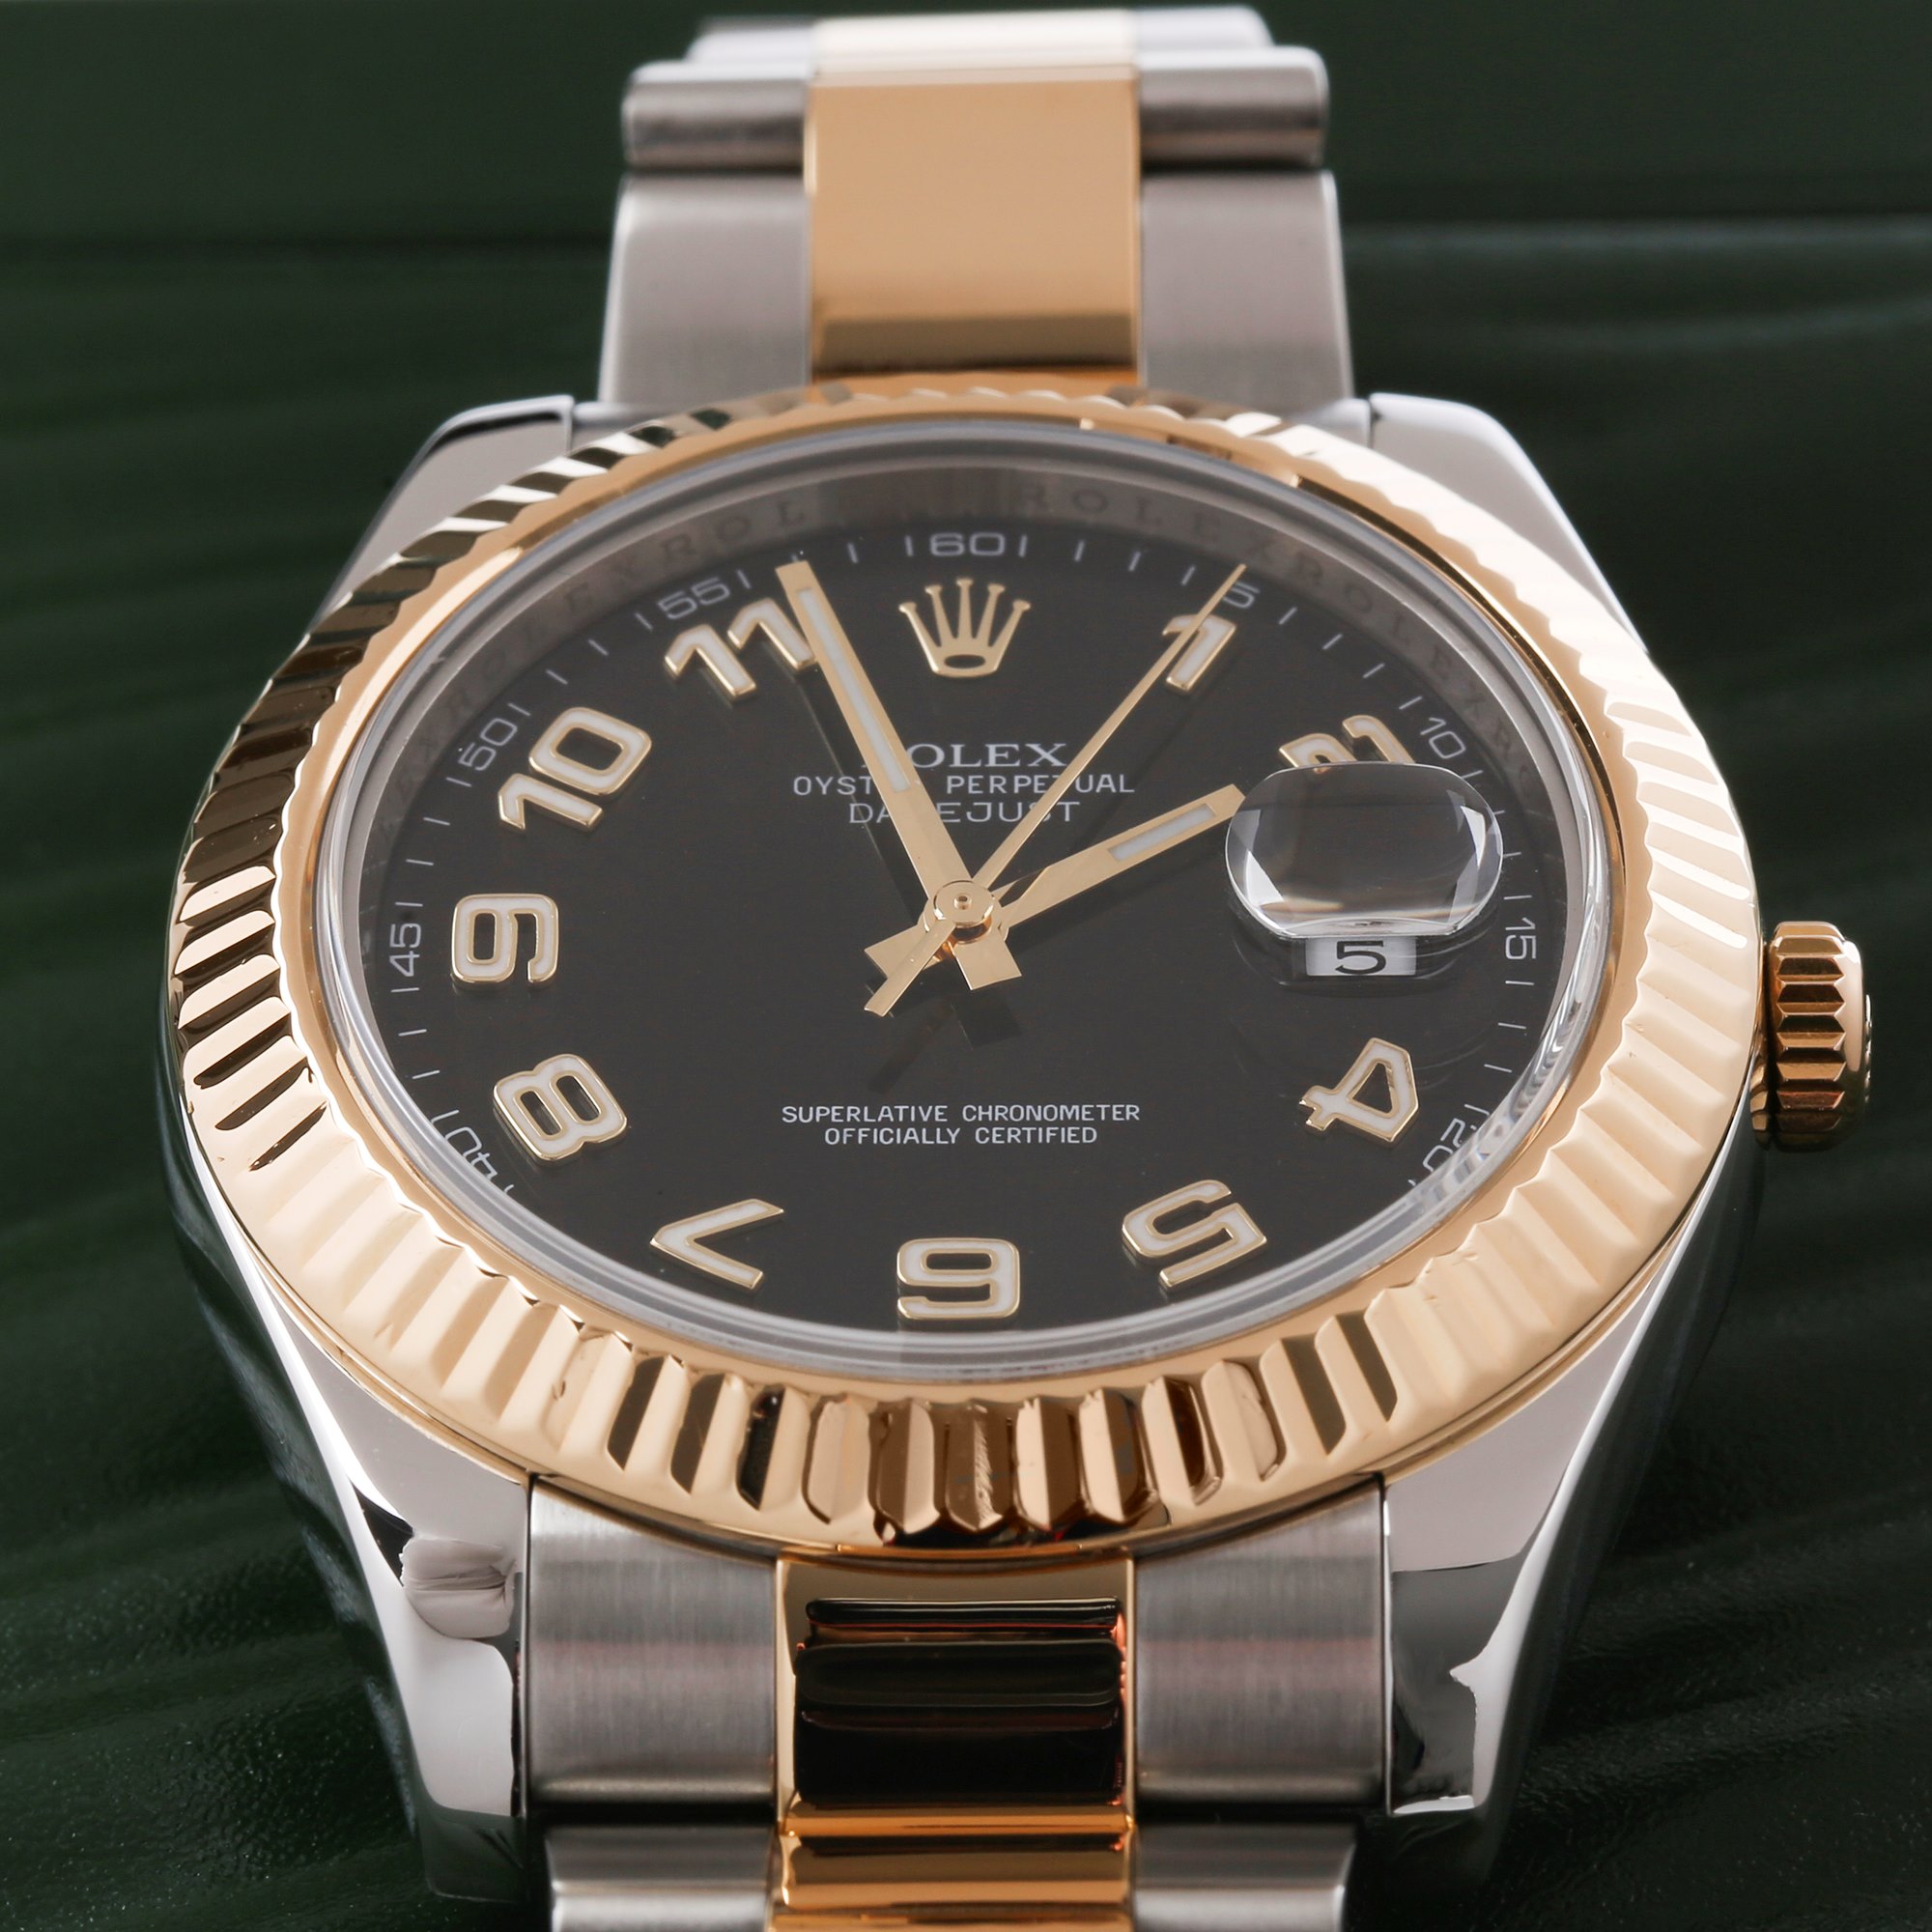 Rolex Datejust II 18K Yellow Gold & Stainless Steel 116333